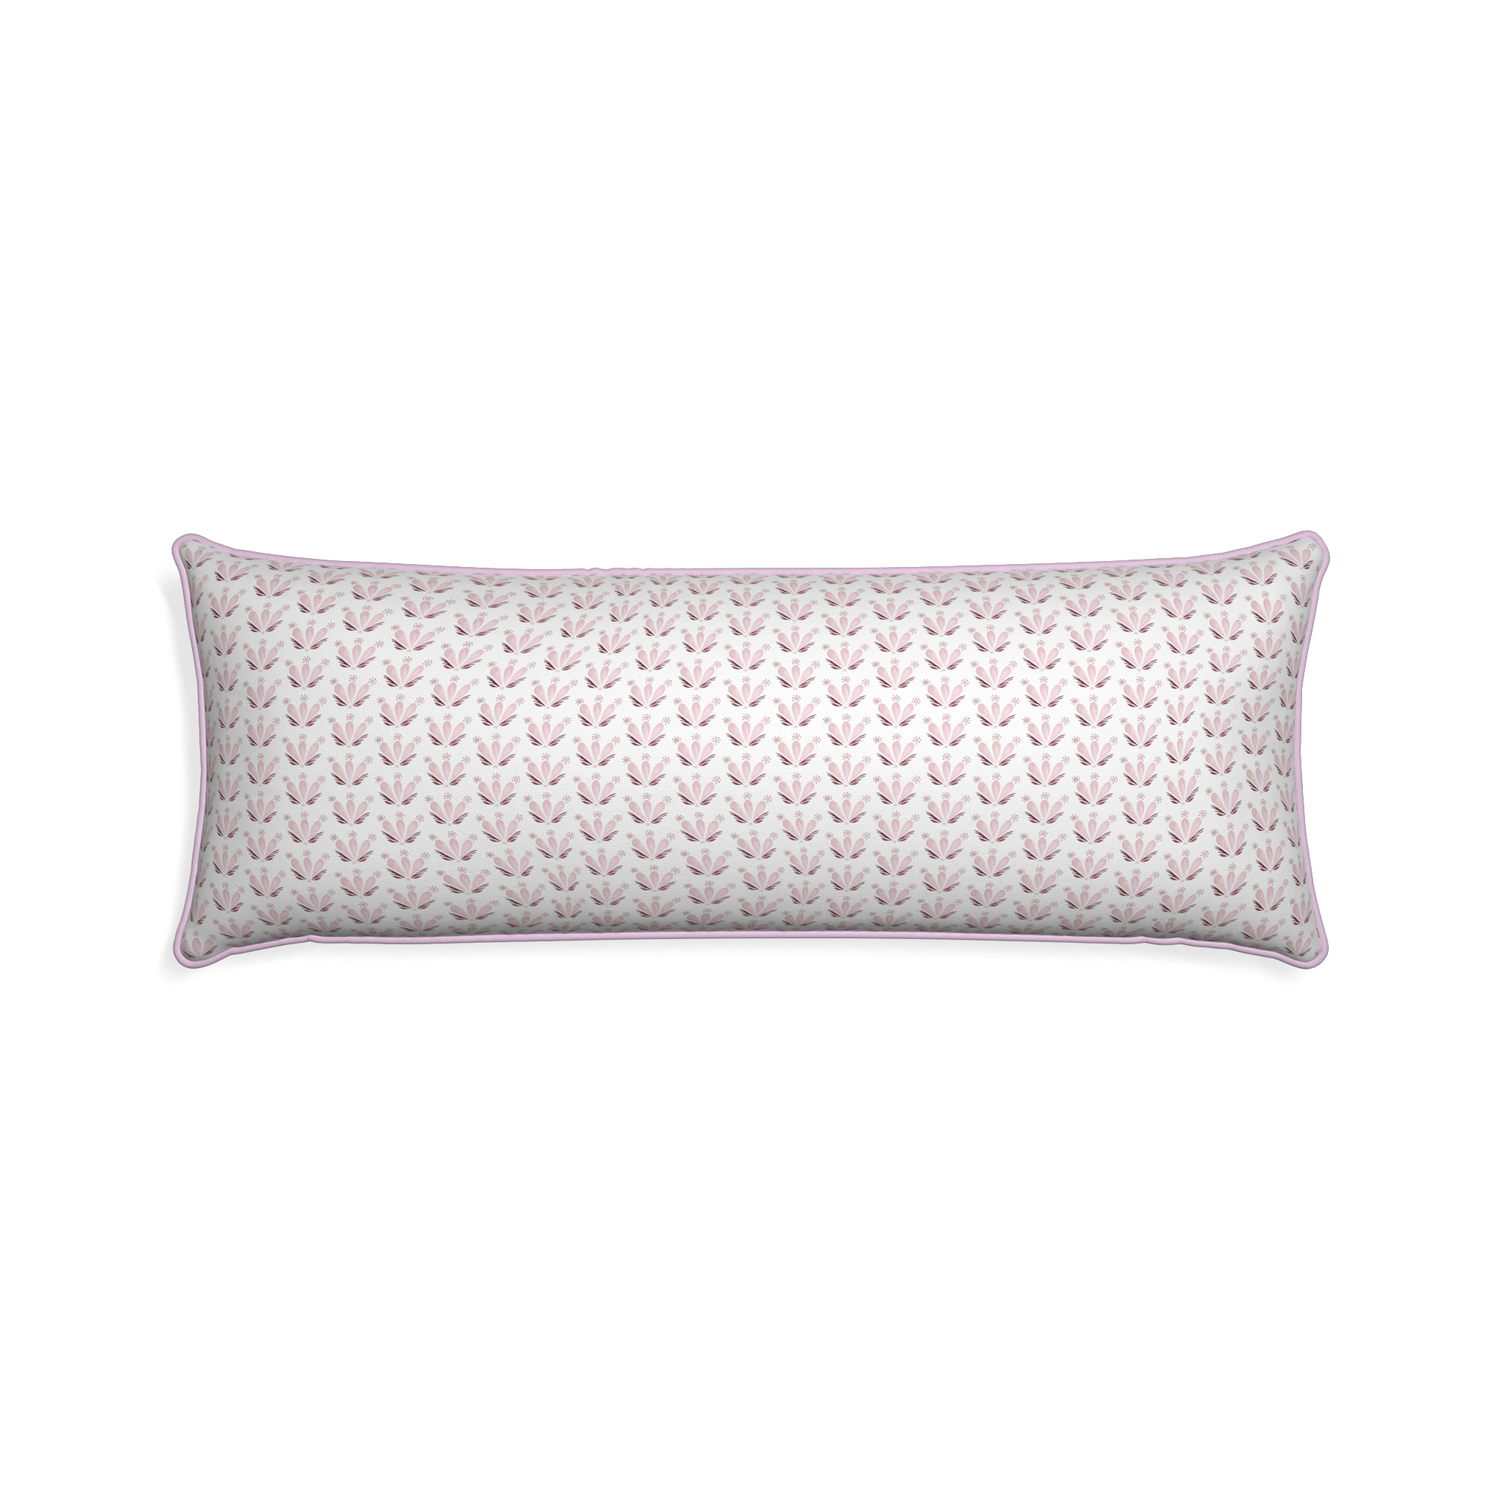 Xl-lumbar serena pink custom pink & burgundy drop repeat floralpillow with l piping on white background